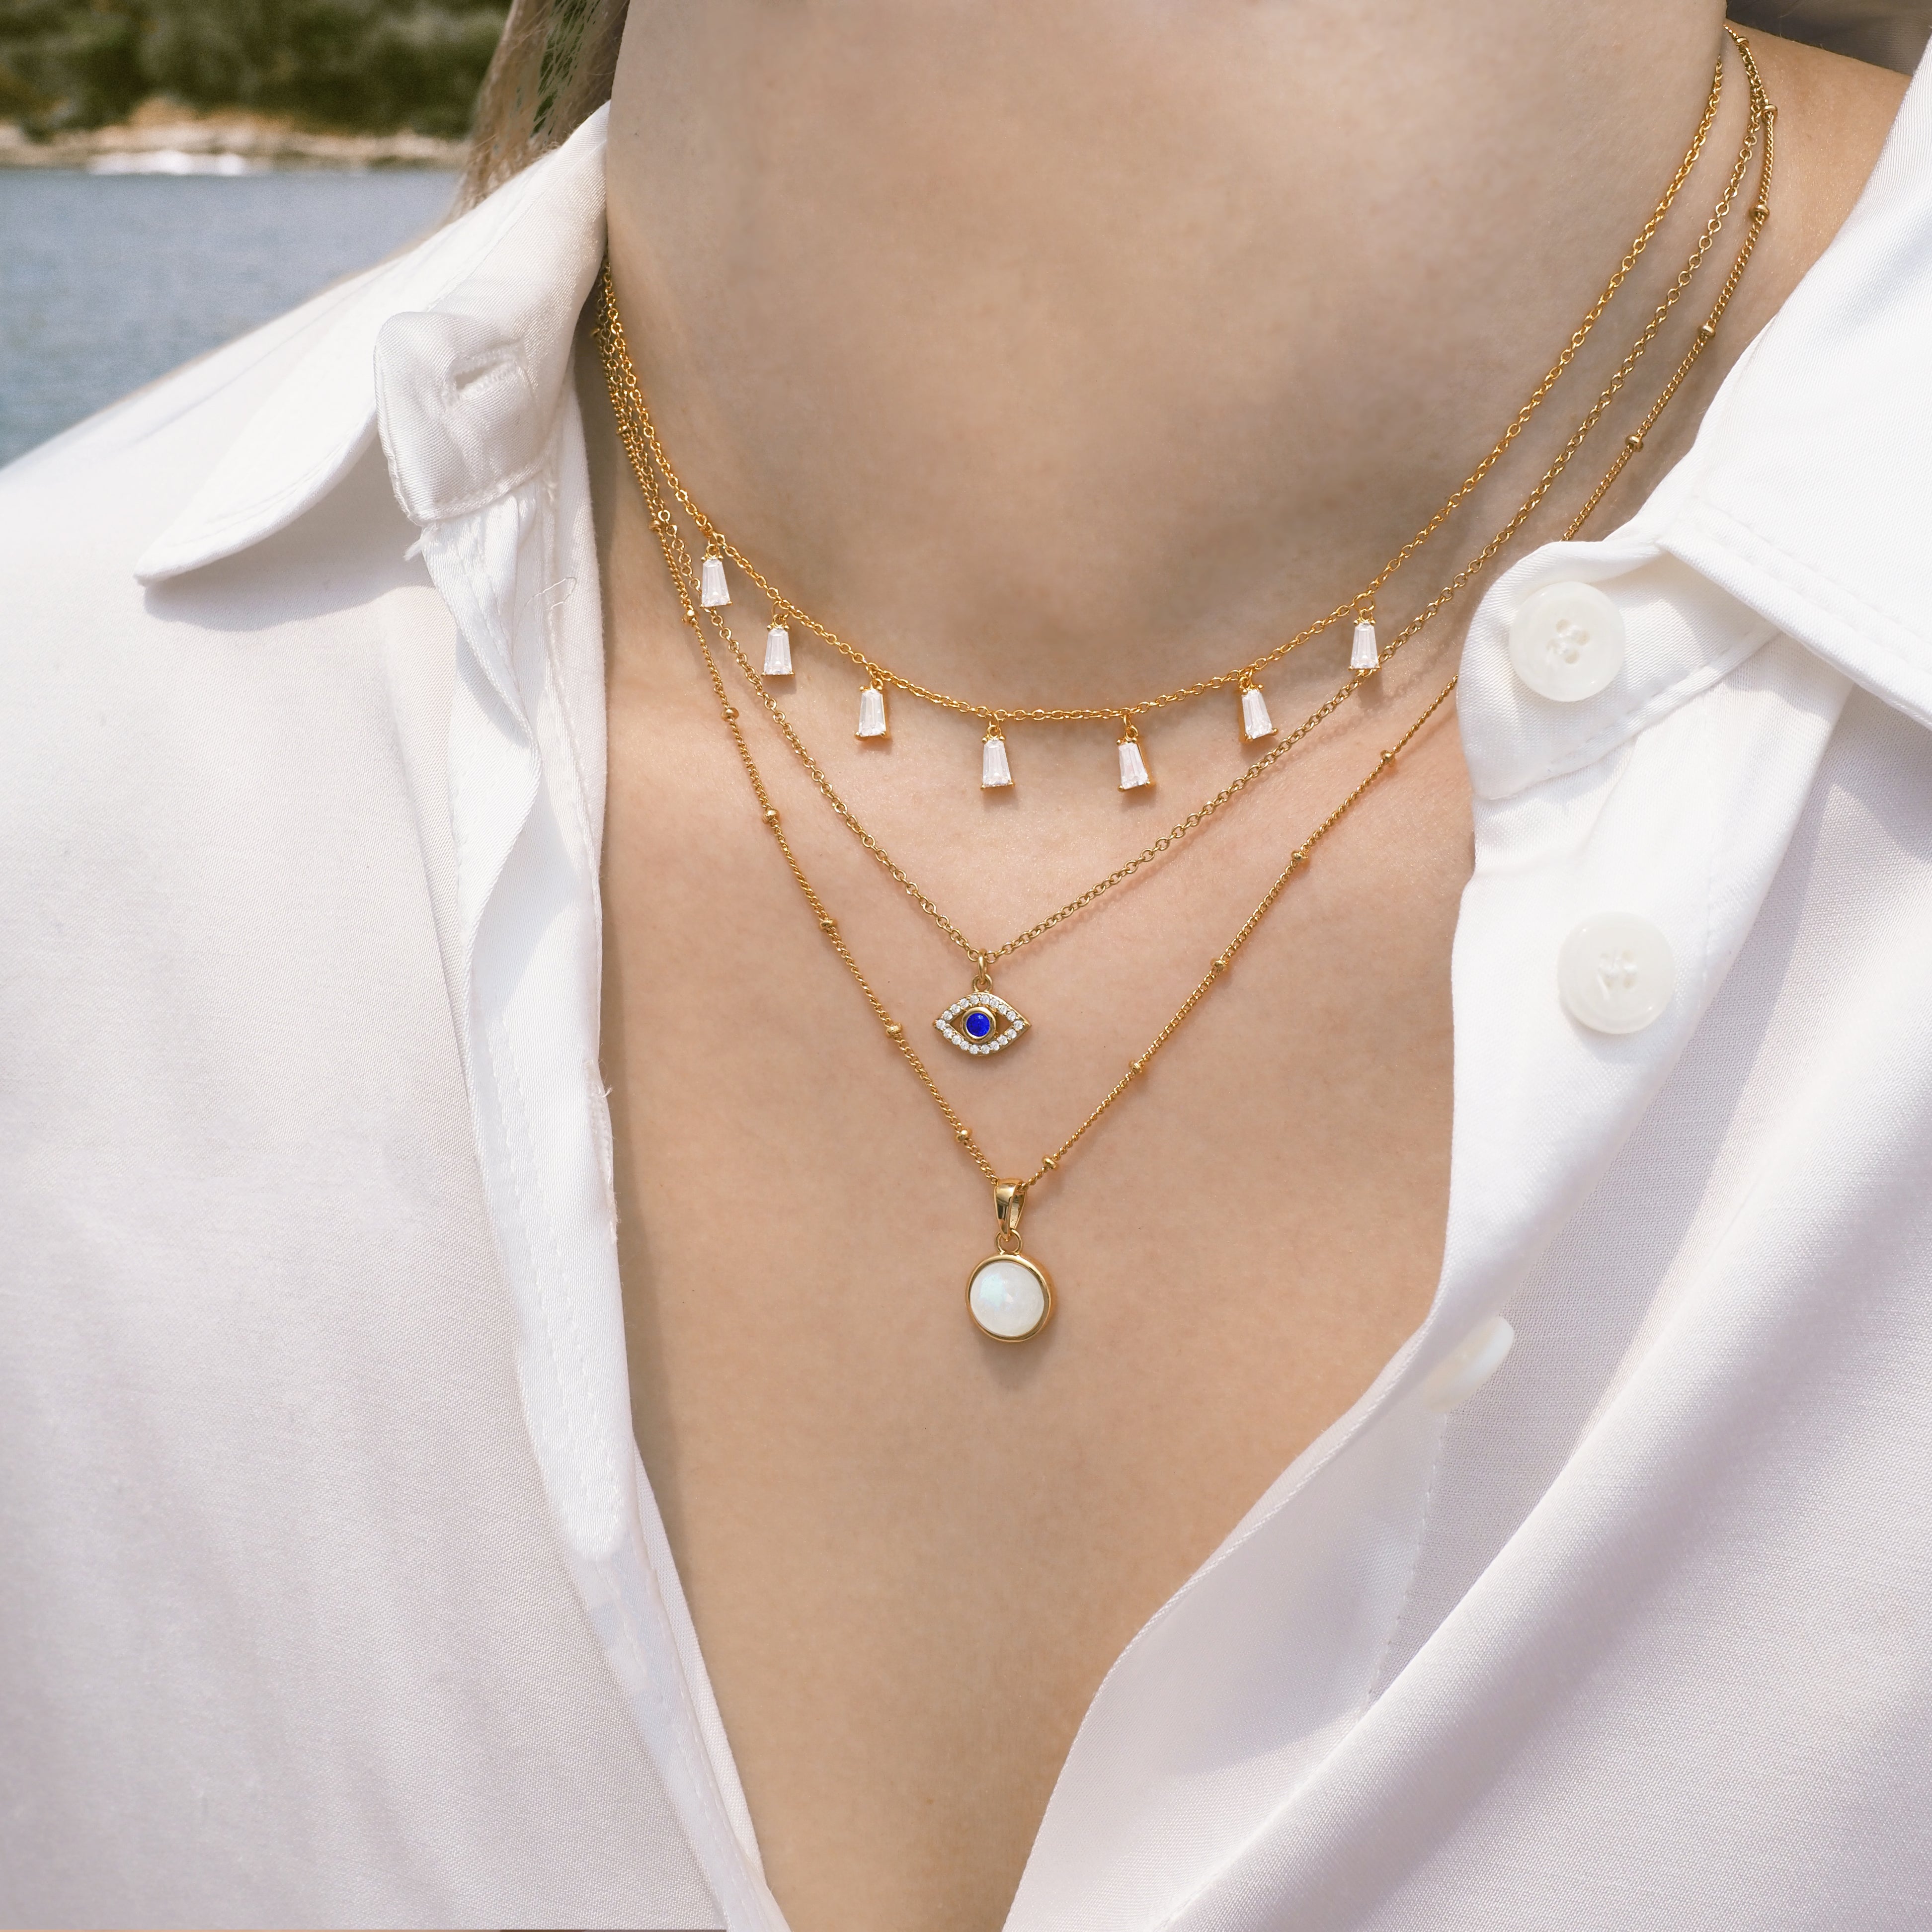 Moonstone With Bubble Chain Necklace